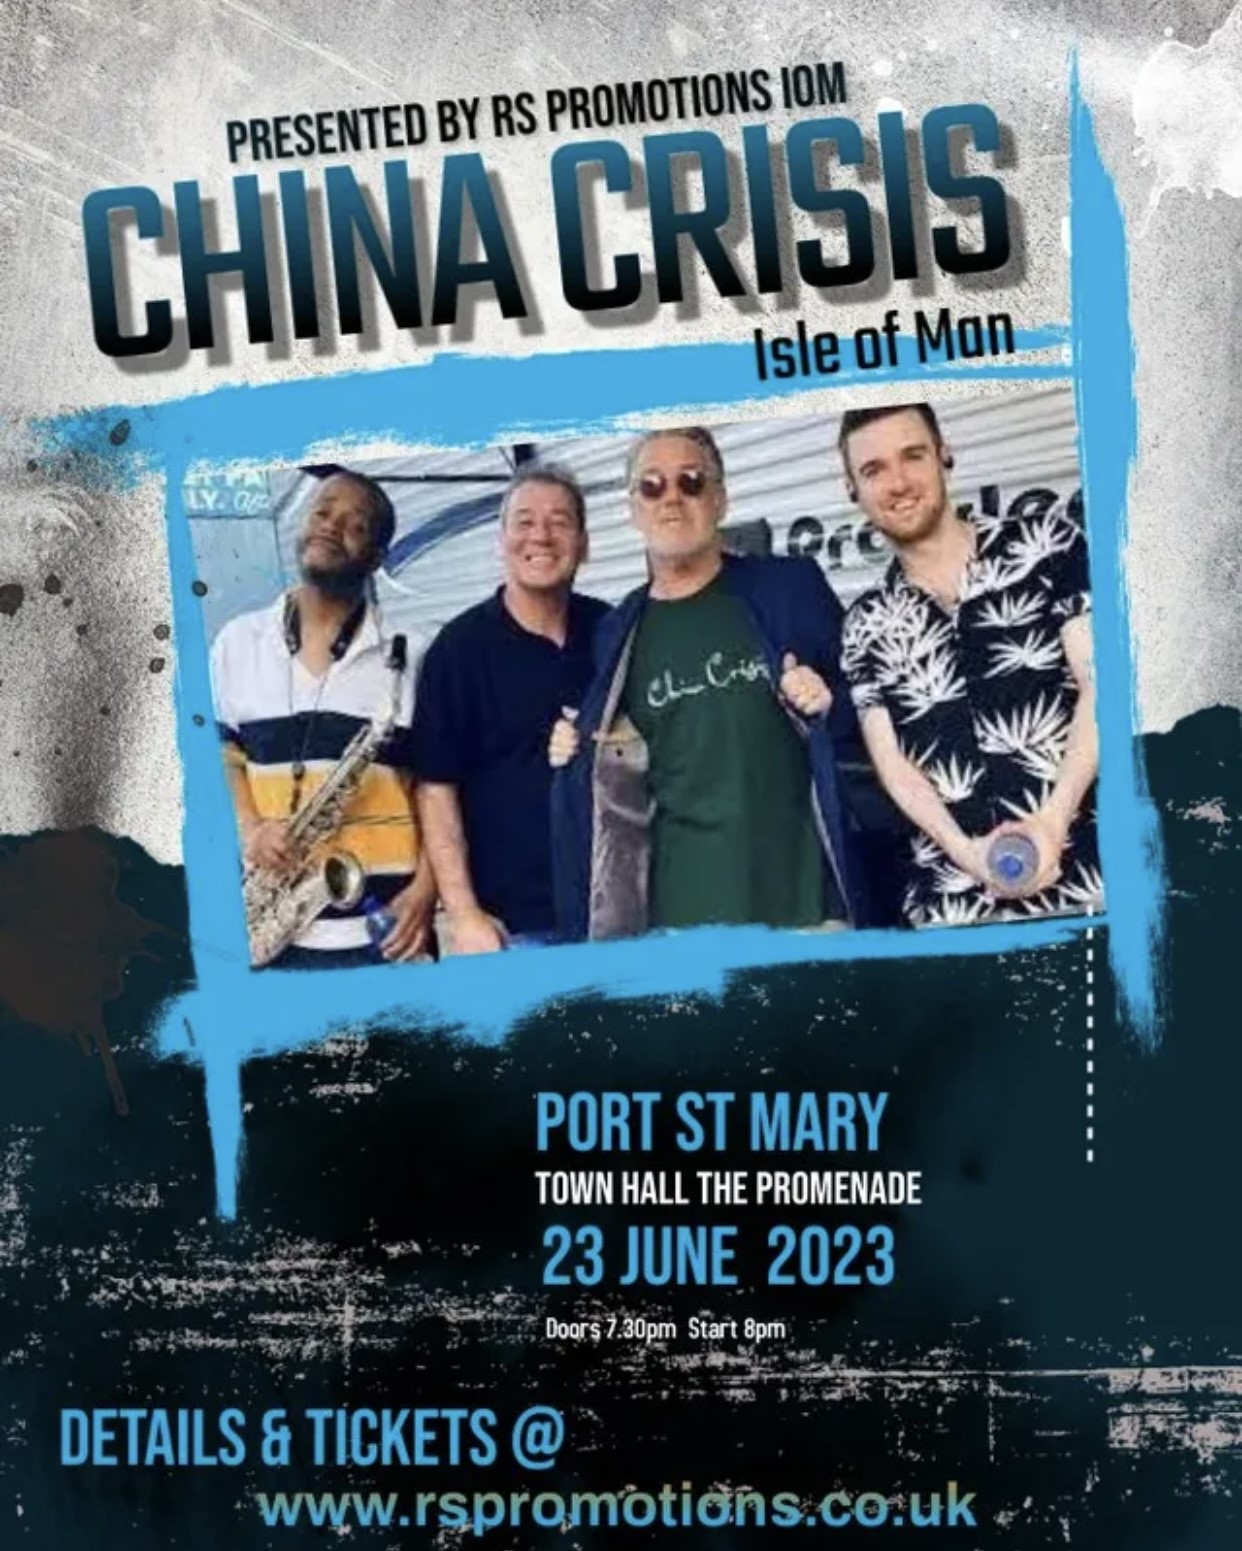 An Evening with CHINA CRISIS In Port St Mary, Isle of Man  on jun. 23, 20:00@Town Hall, The Promenade, Port St Mary - Compra entradas y obtén información enRS PROMOTIONS 